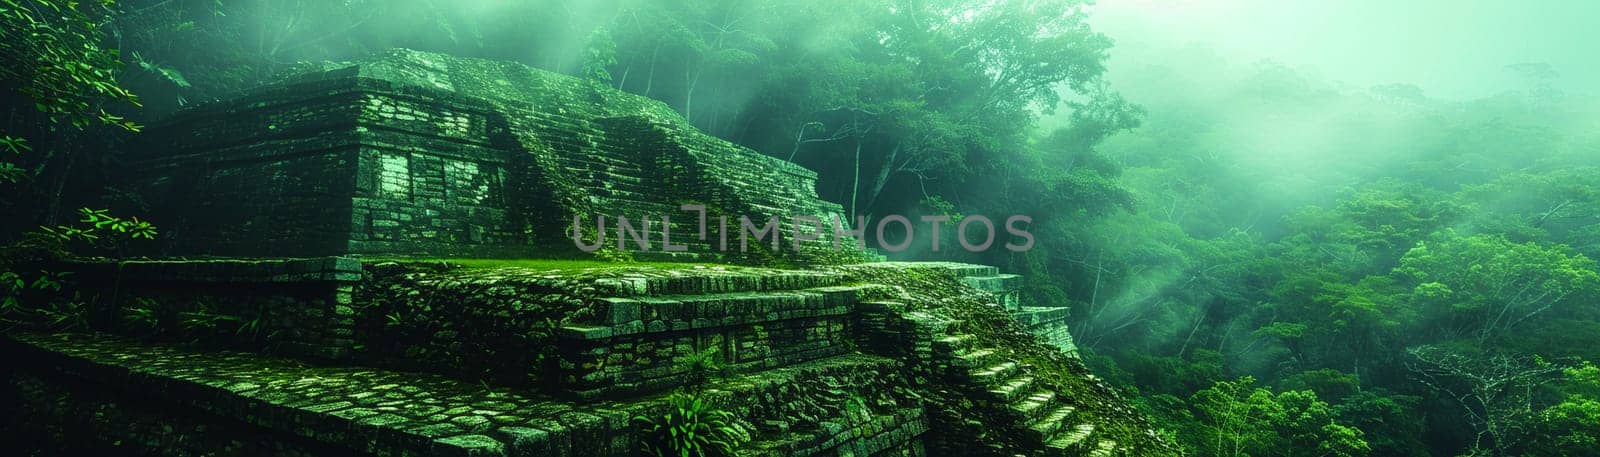 Mayan Pyramid Edges Blurring into a Jungle Canopy, The structure's silhouette merges with the foliage, a relic of Mesoamerican spirituality.